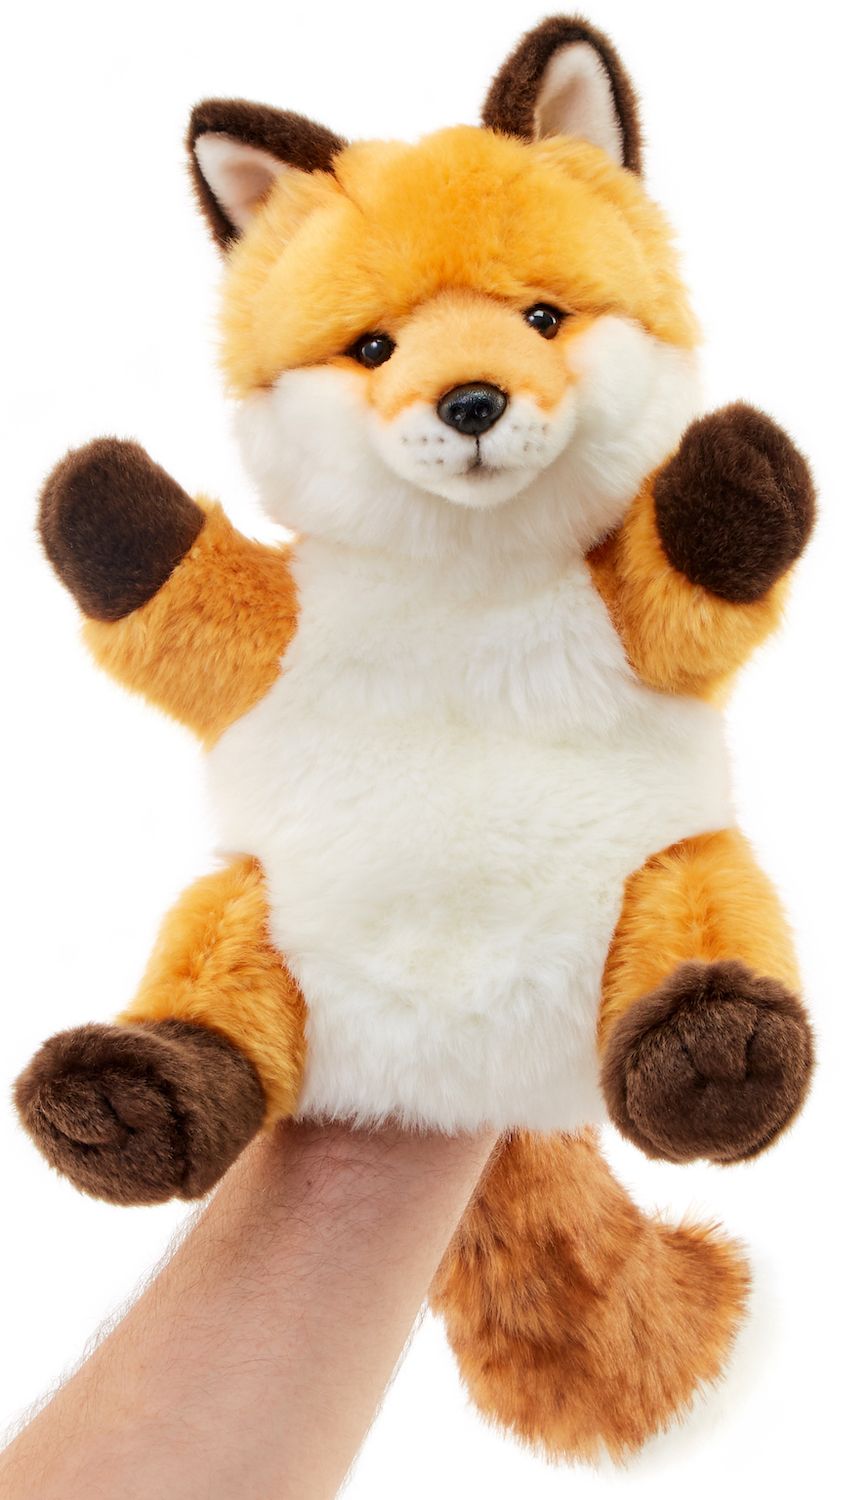 Uni-Toys - Hand puppet red fox - 28 cm (height) 